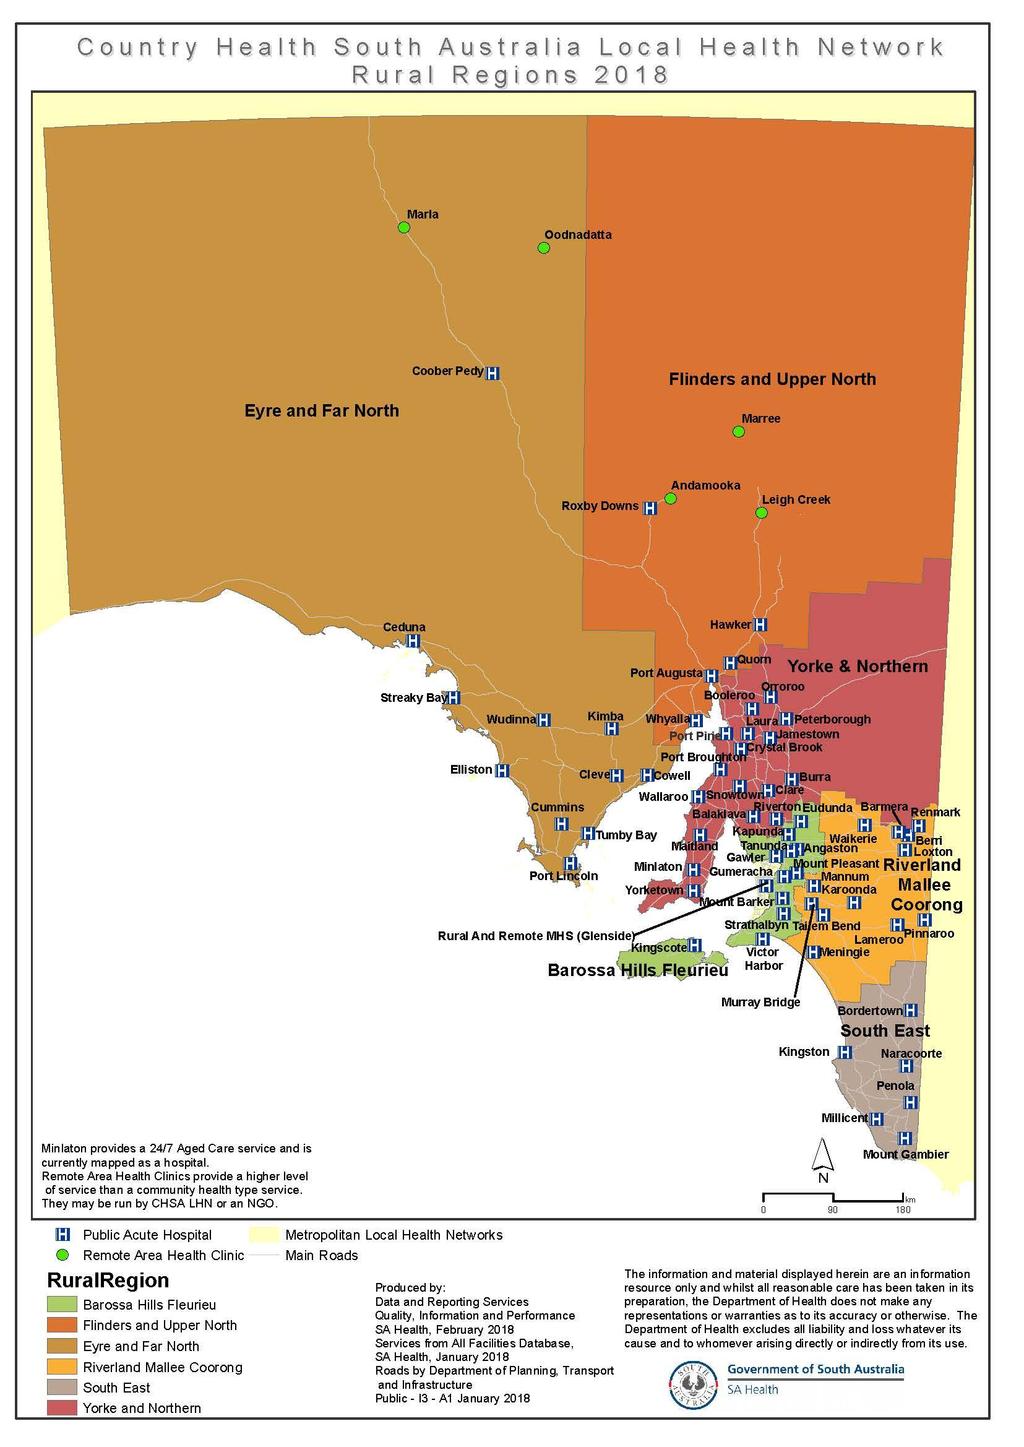 Appendix 1 Current Country Health SA Local Health Network regions showing proposed